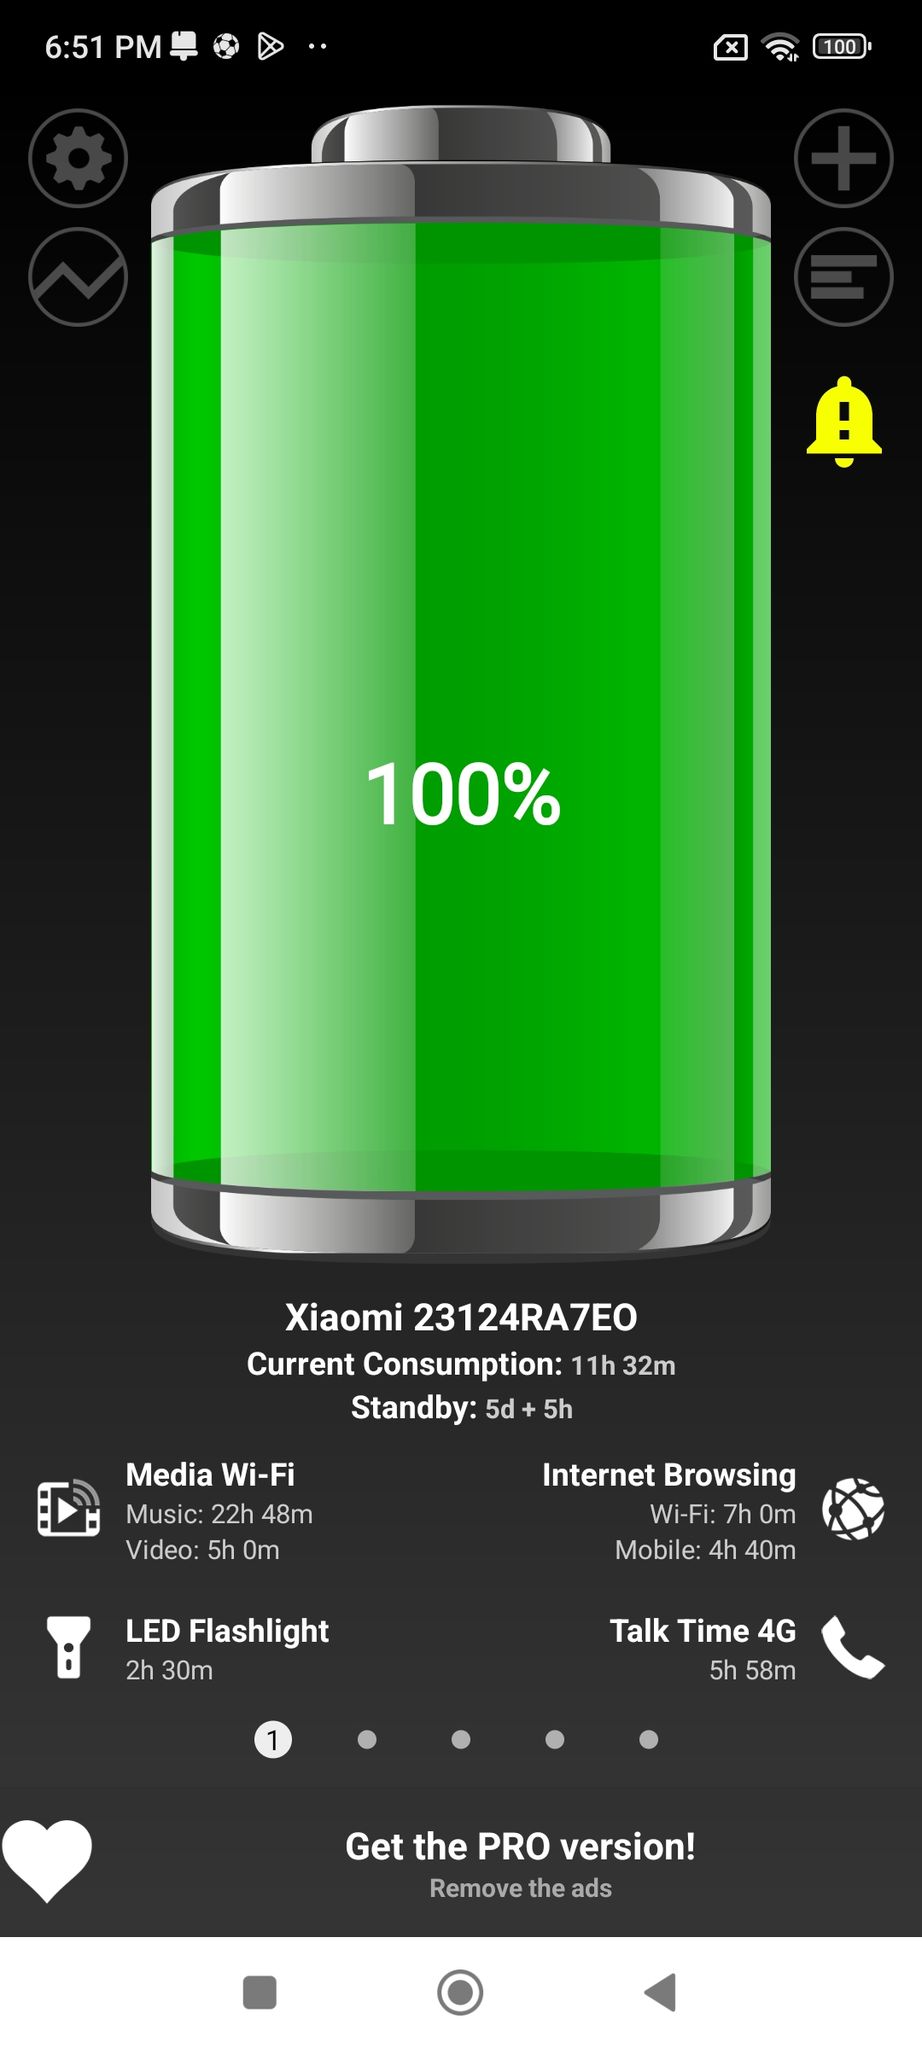 Battery life testing was performed using the Battery HD application